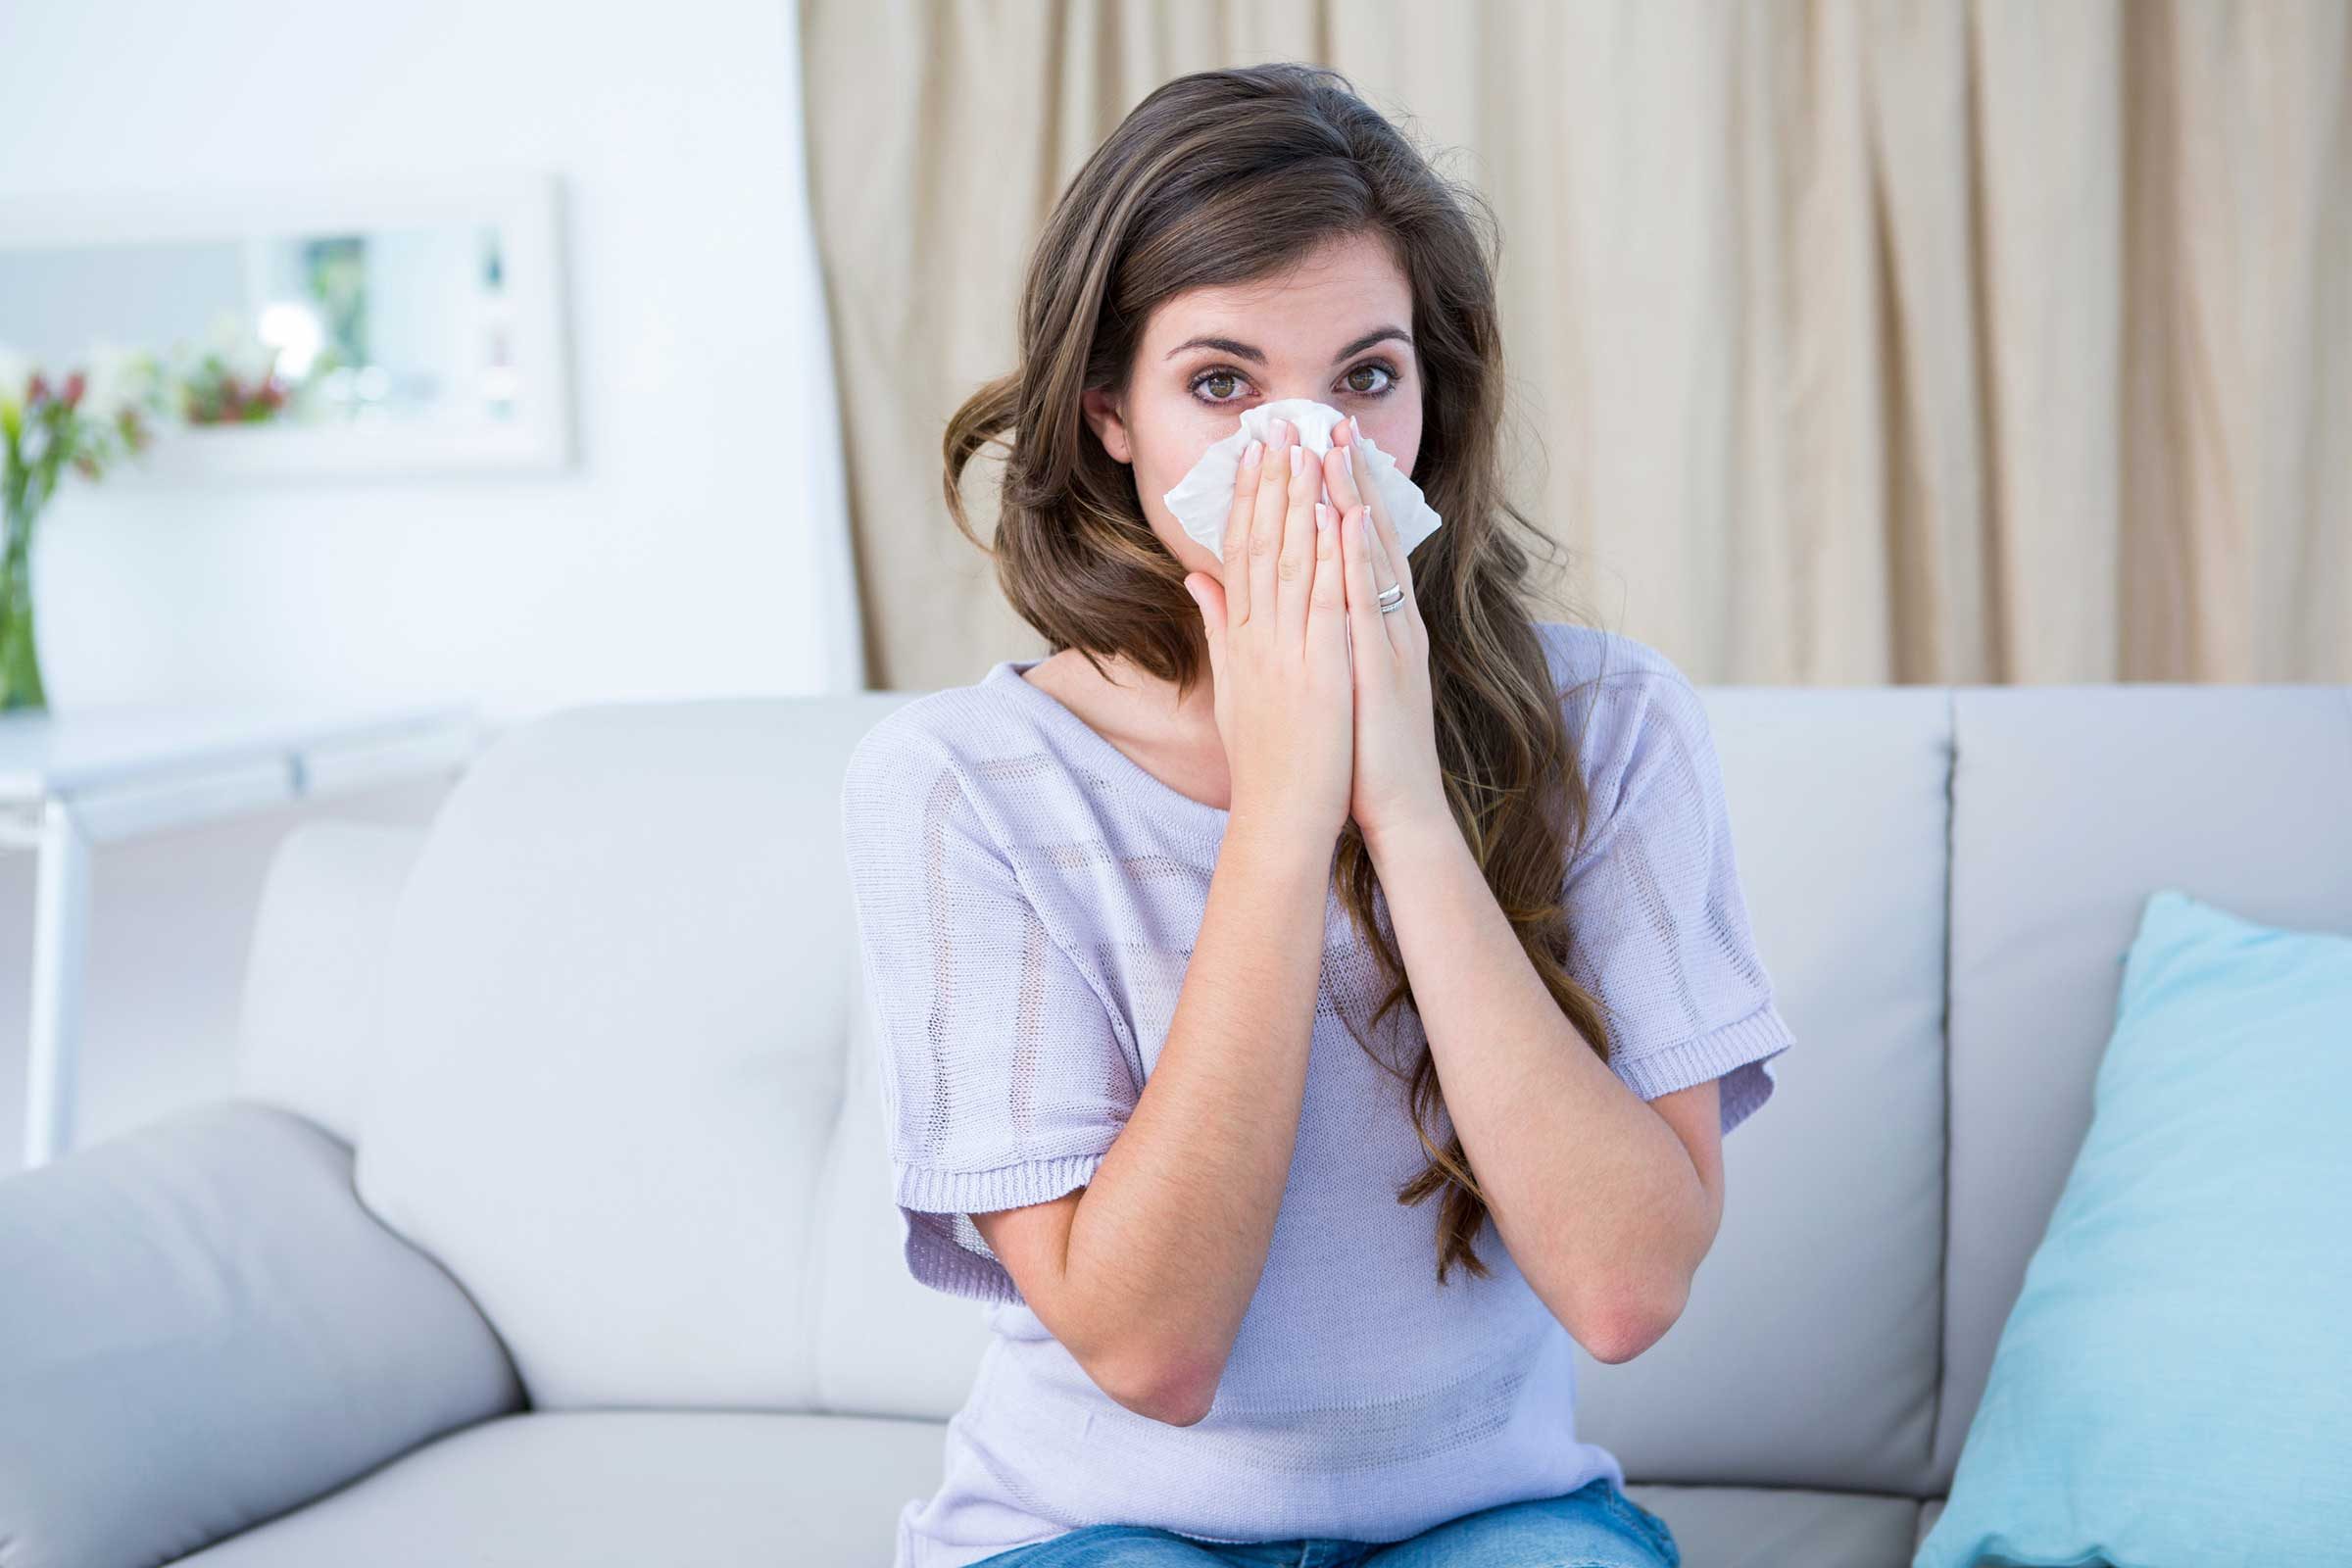 Nose Always Running? 12 Surprising Reasons You Have the Sniffles